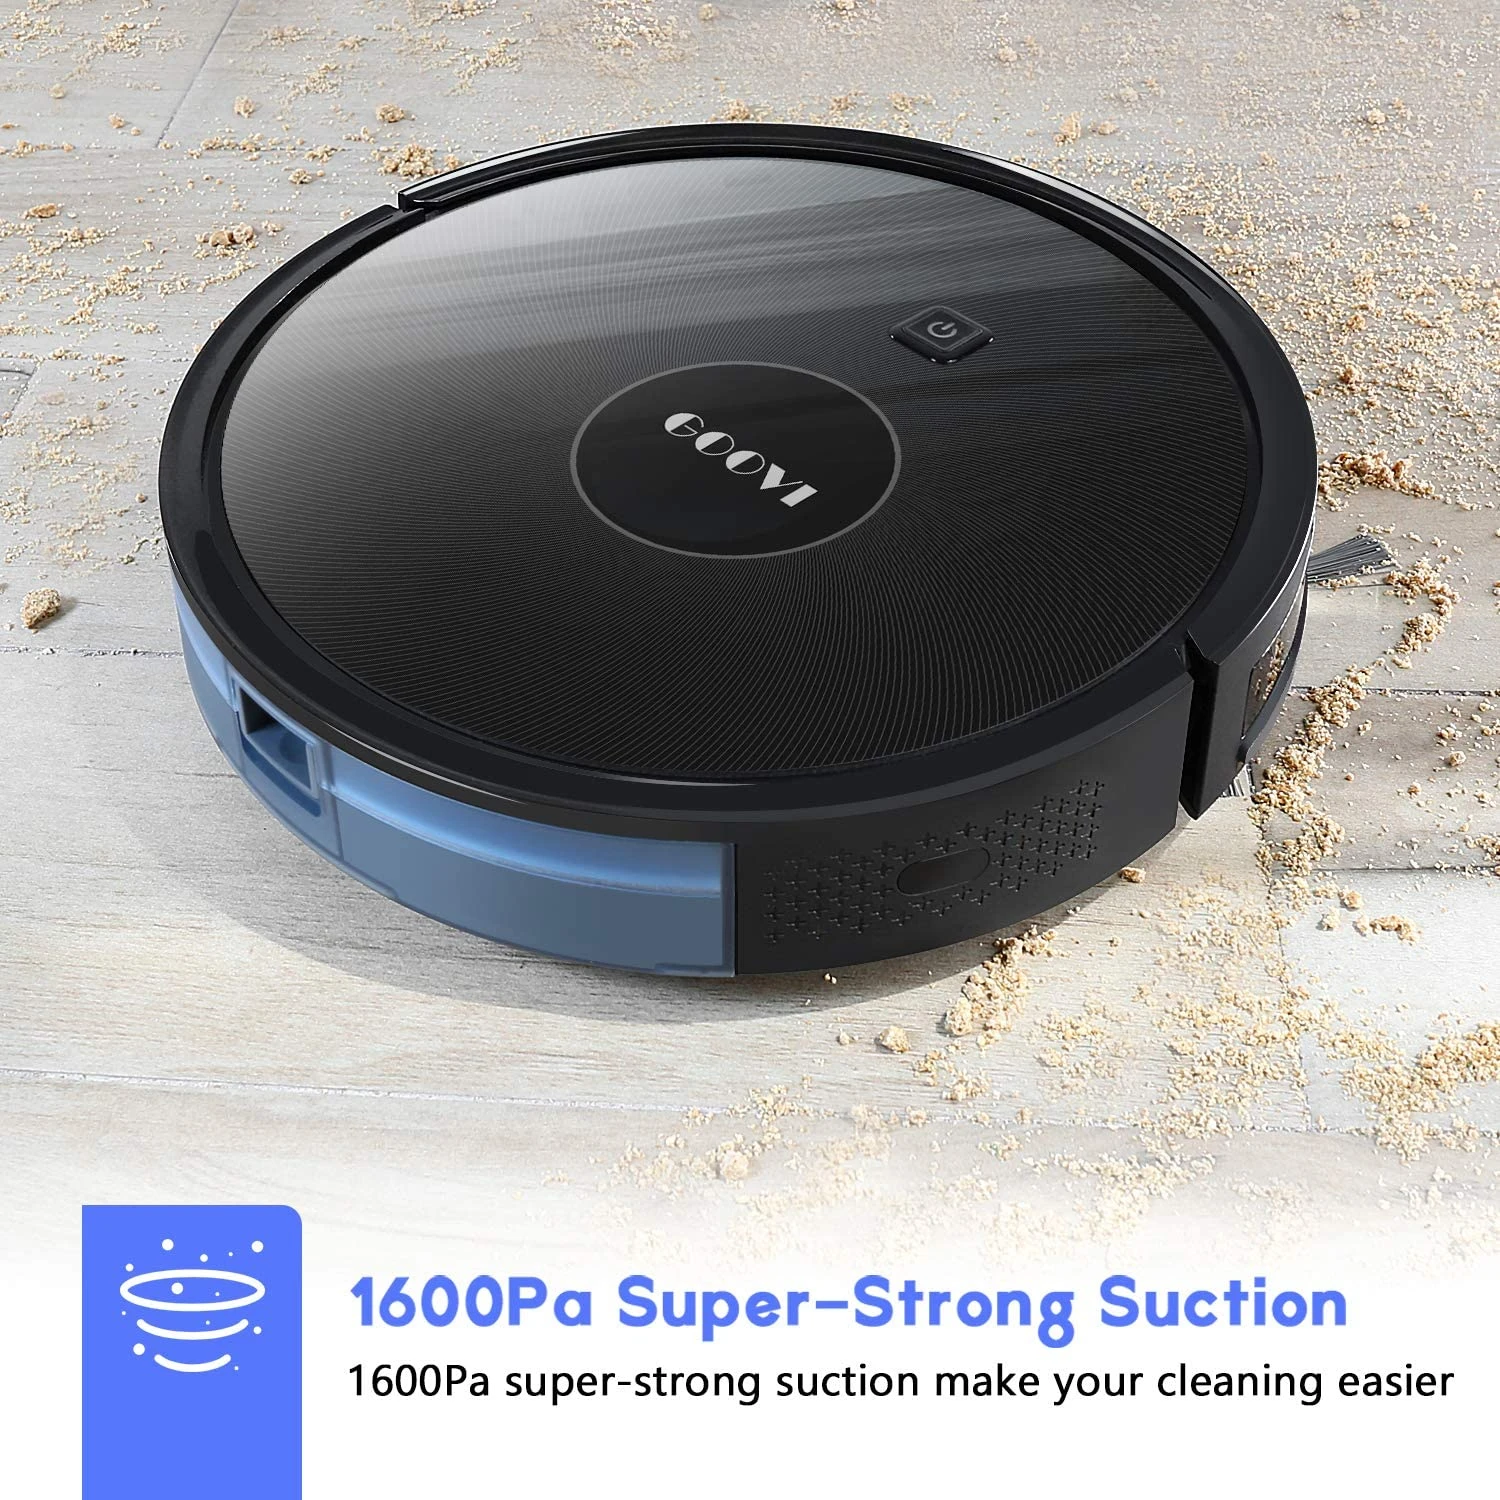 Goovi C412 D380 1600Pa Pet Hair Cleaning Robot Vacuum Cleaner with Self Charging